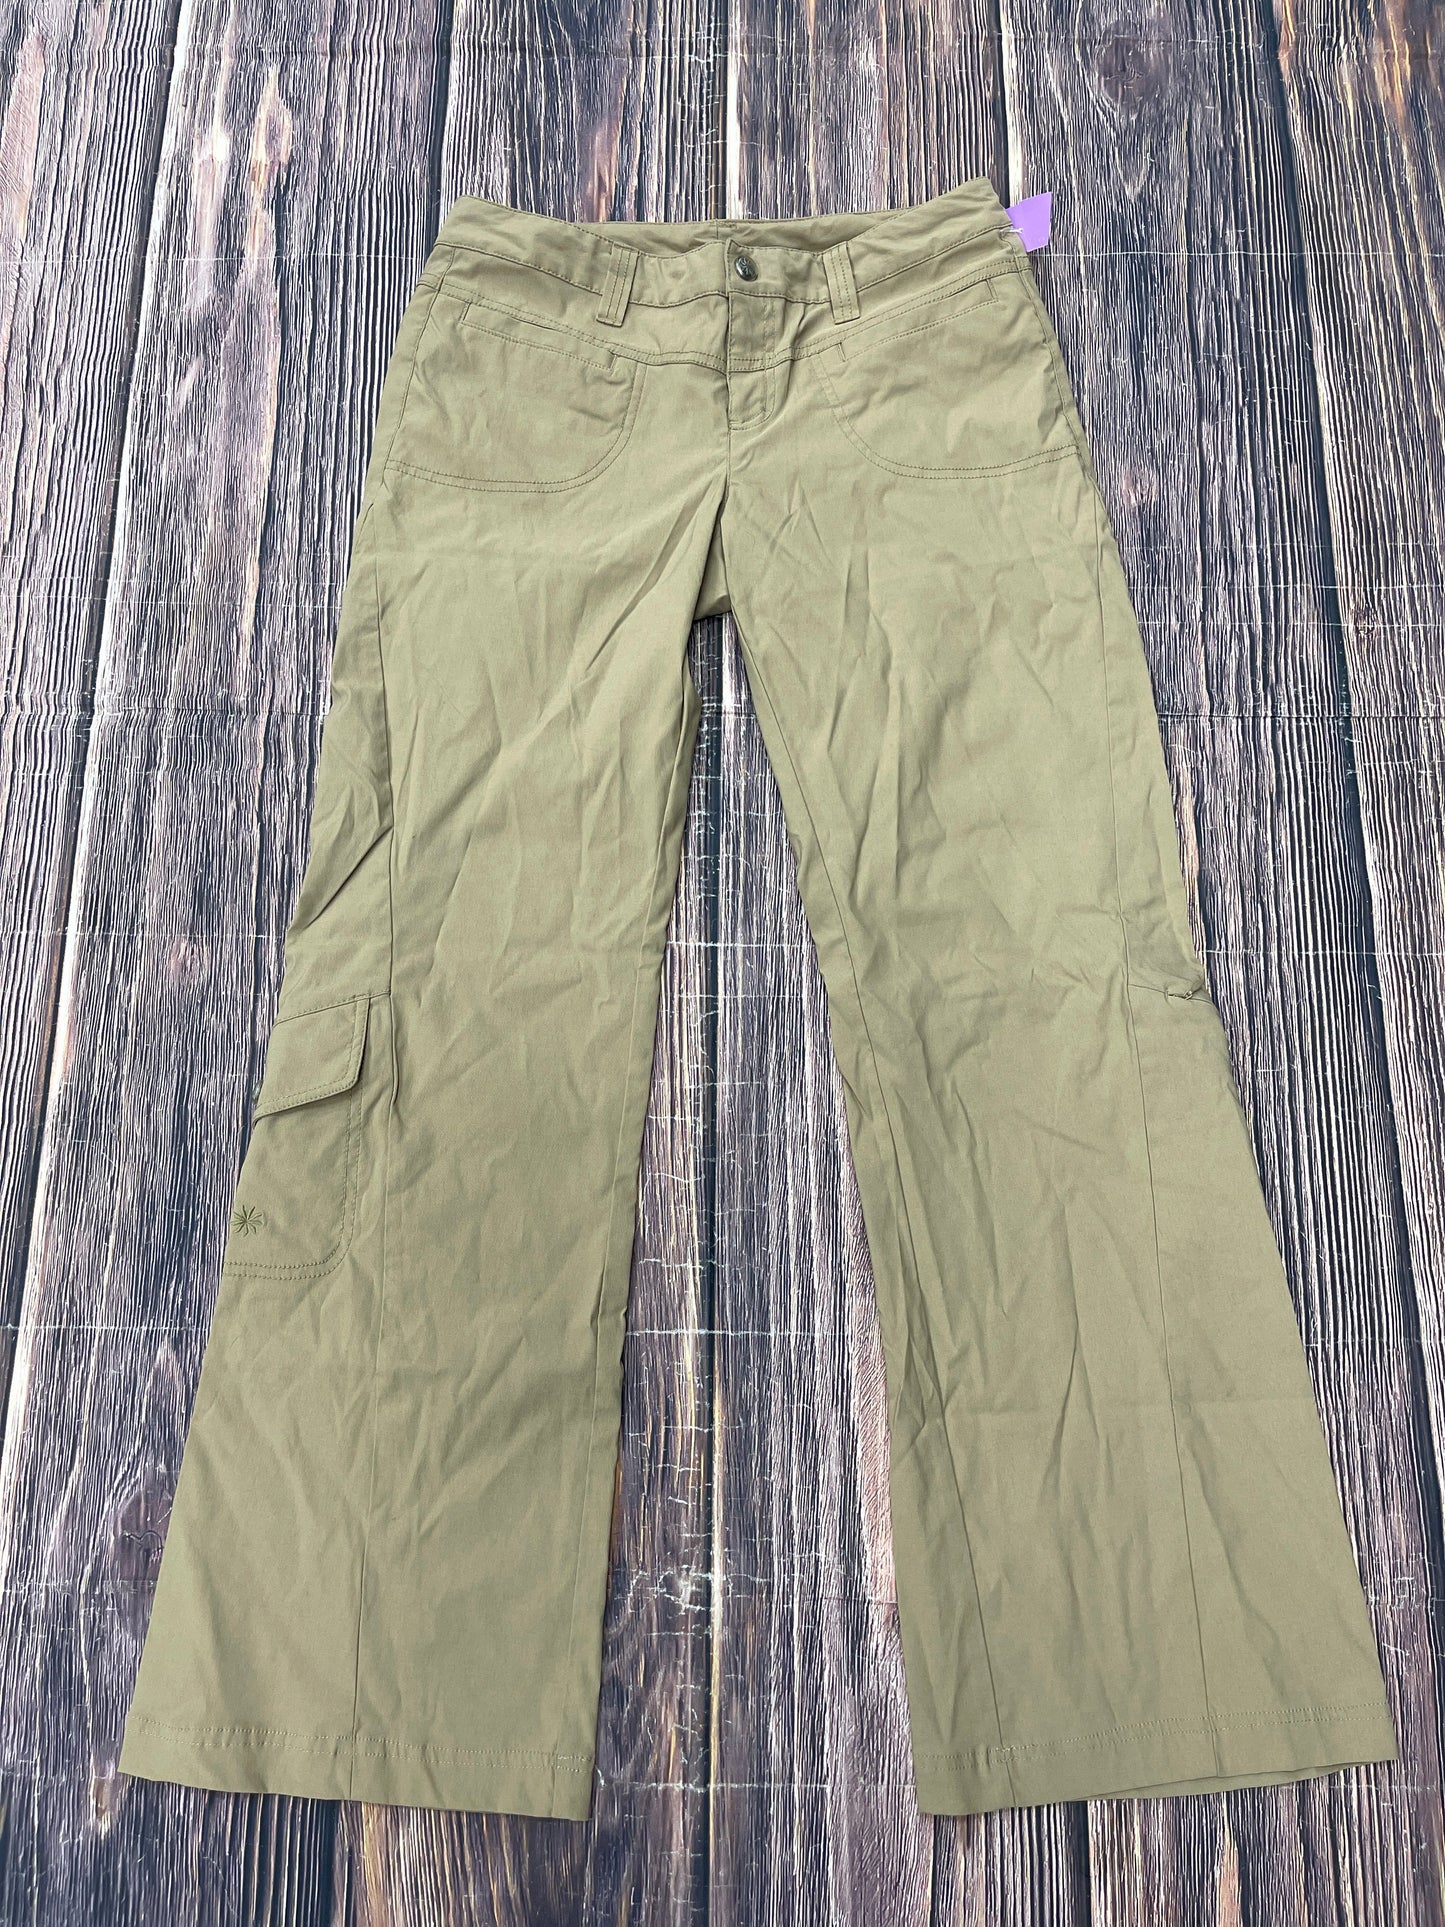 Pants Ankle By Athleta  Size: 8